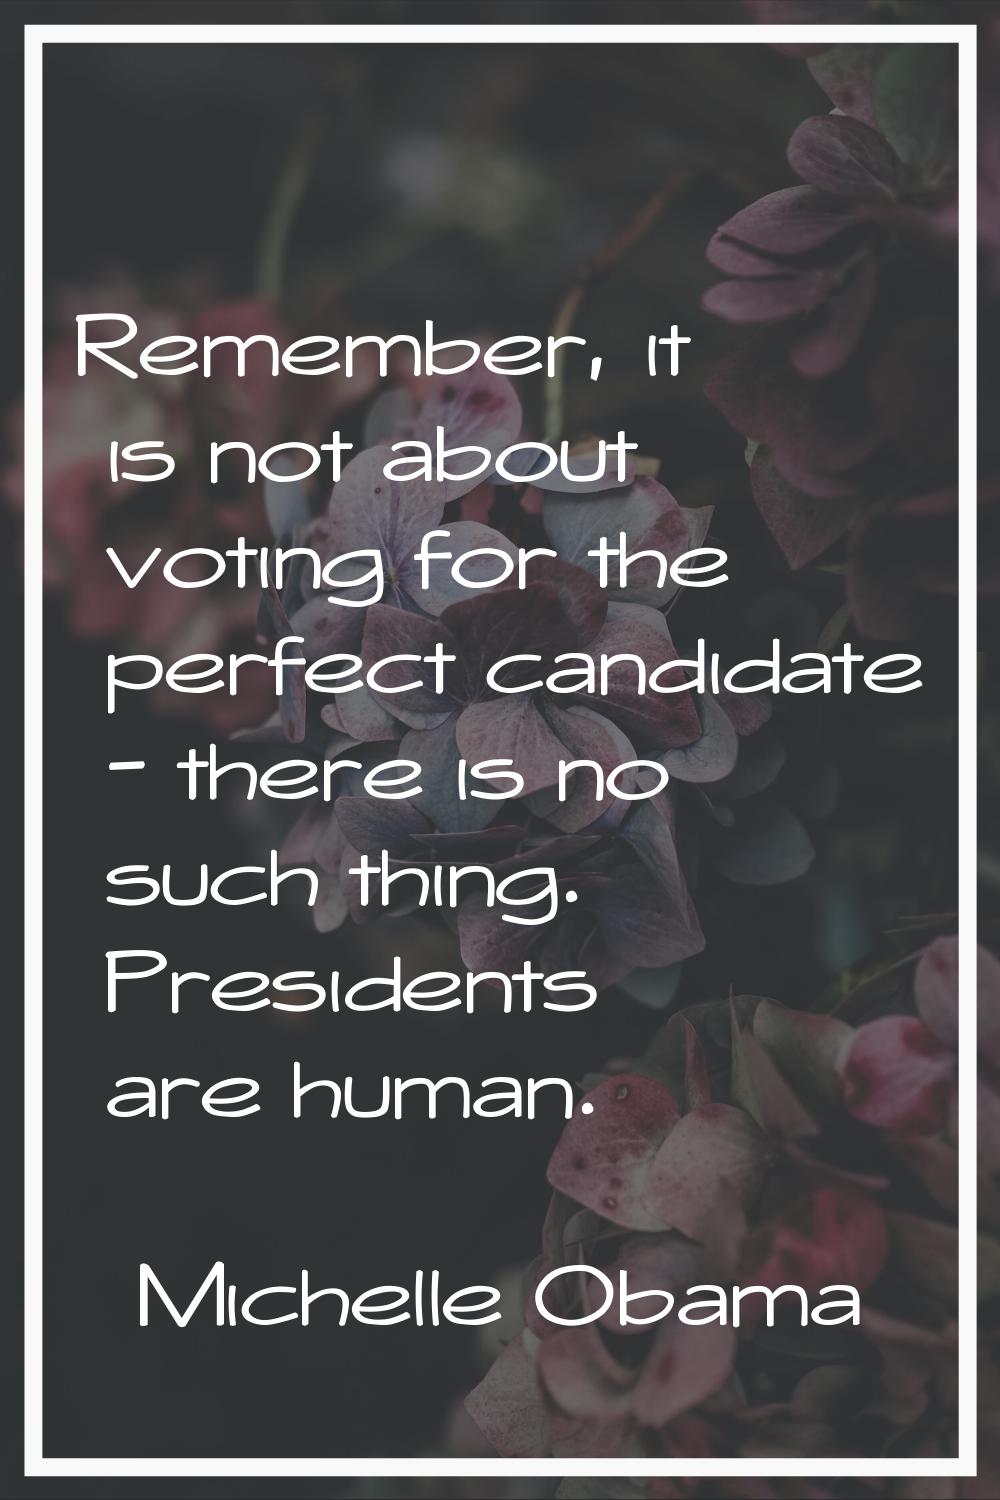 Remember, it is not about voting for the perfect candidate - there is no such thing. Presidents are